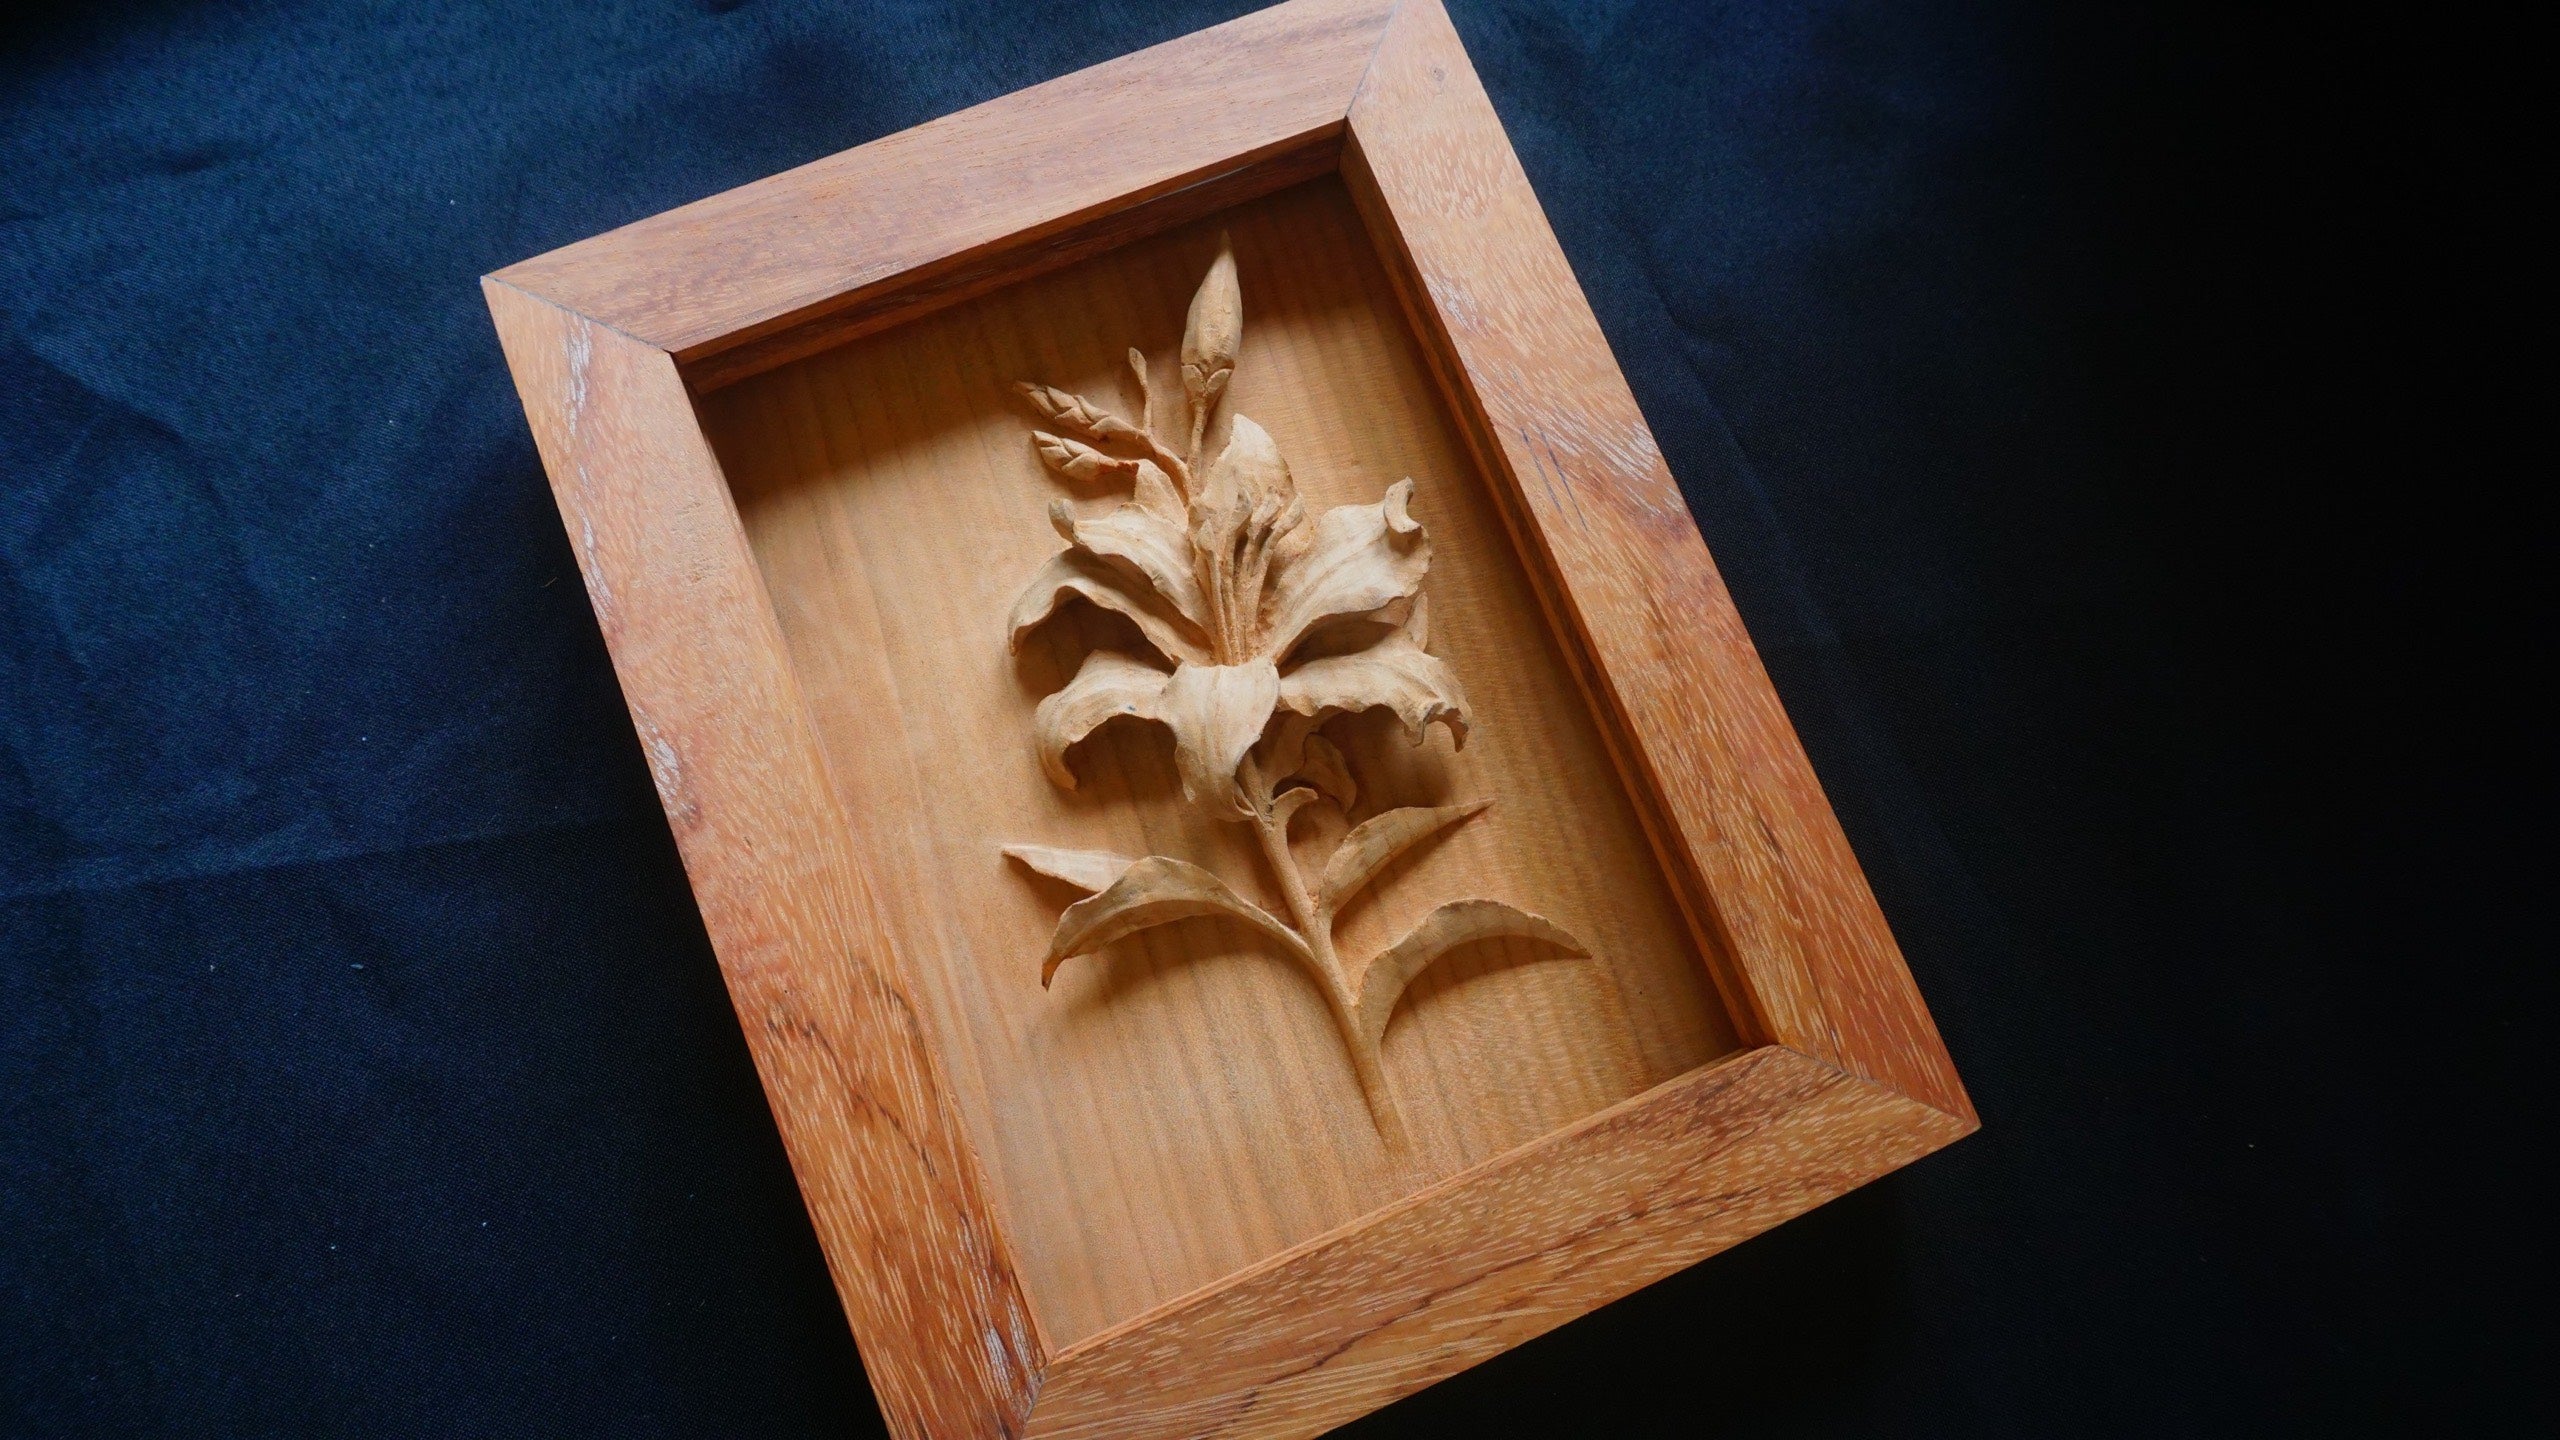 Lily Flower wood Carving